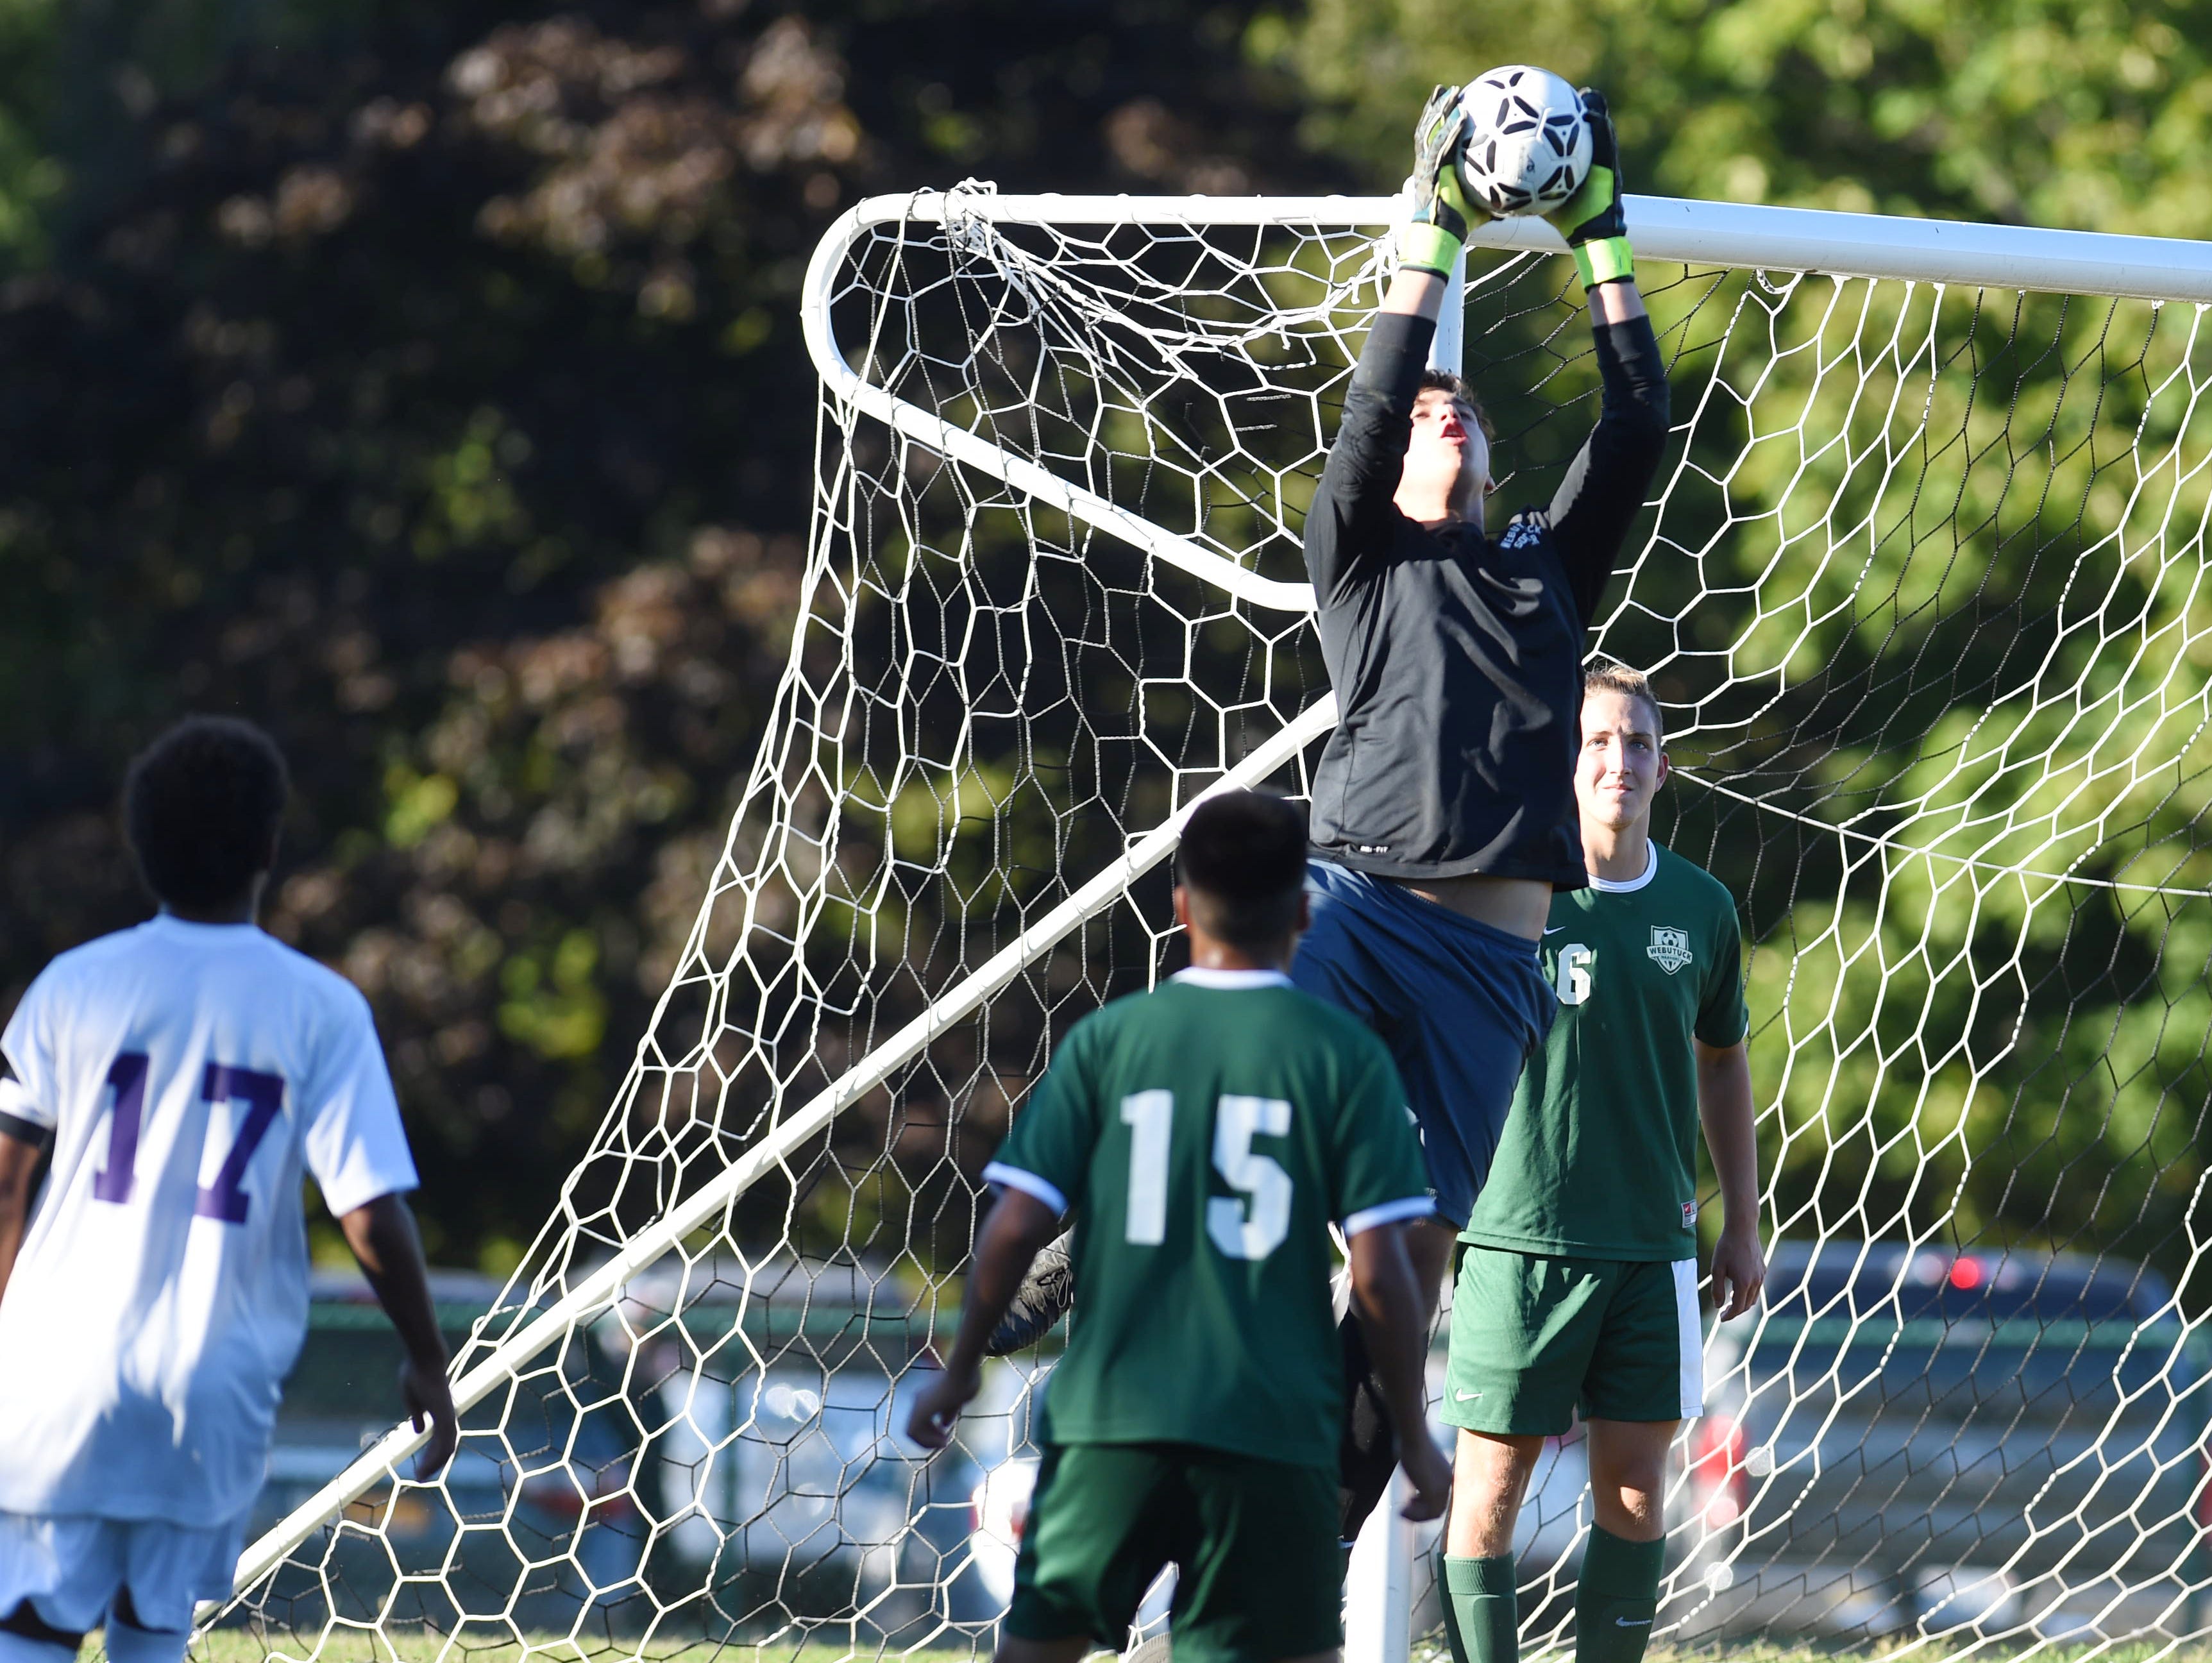 Webutuck's Thomas Stephanopoulos makes a save during Thursday's game 1-1 tie in Rhinebeck.